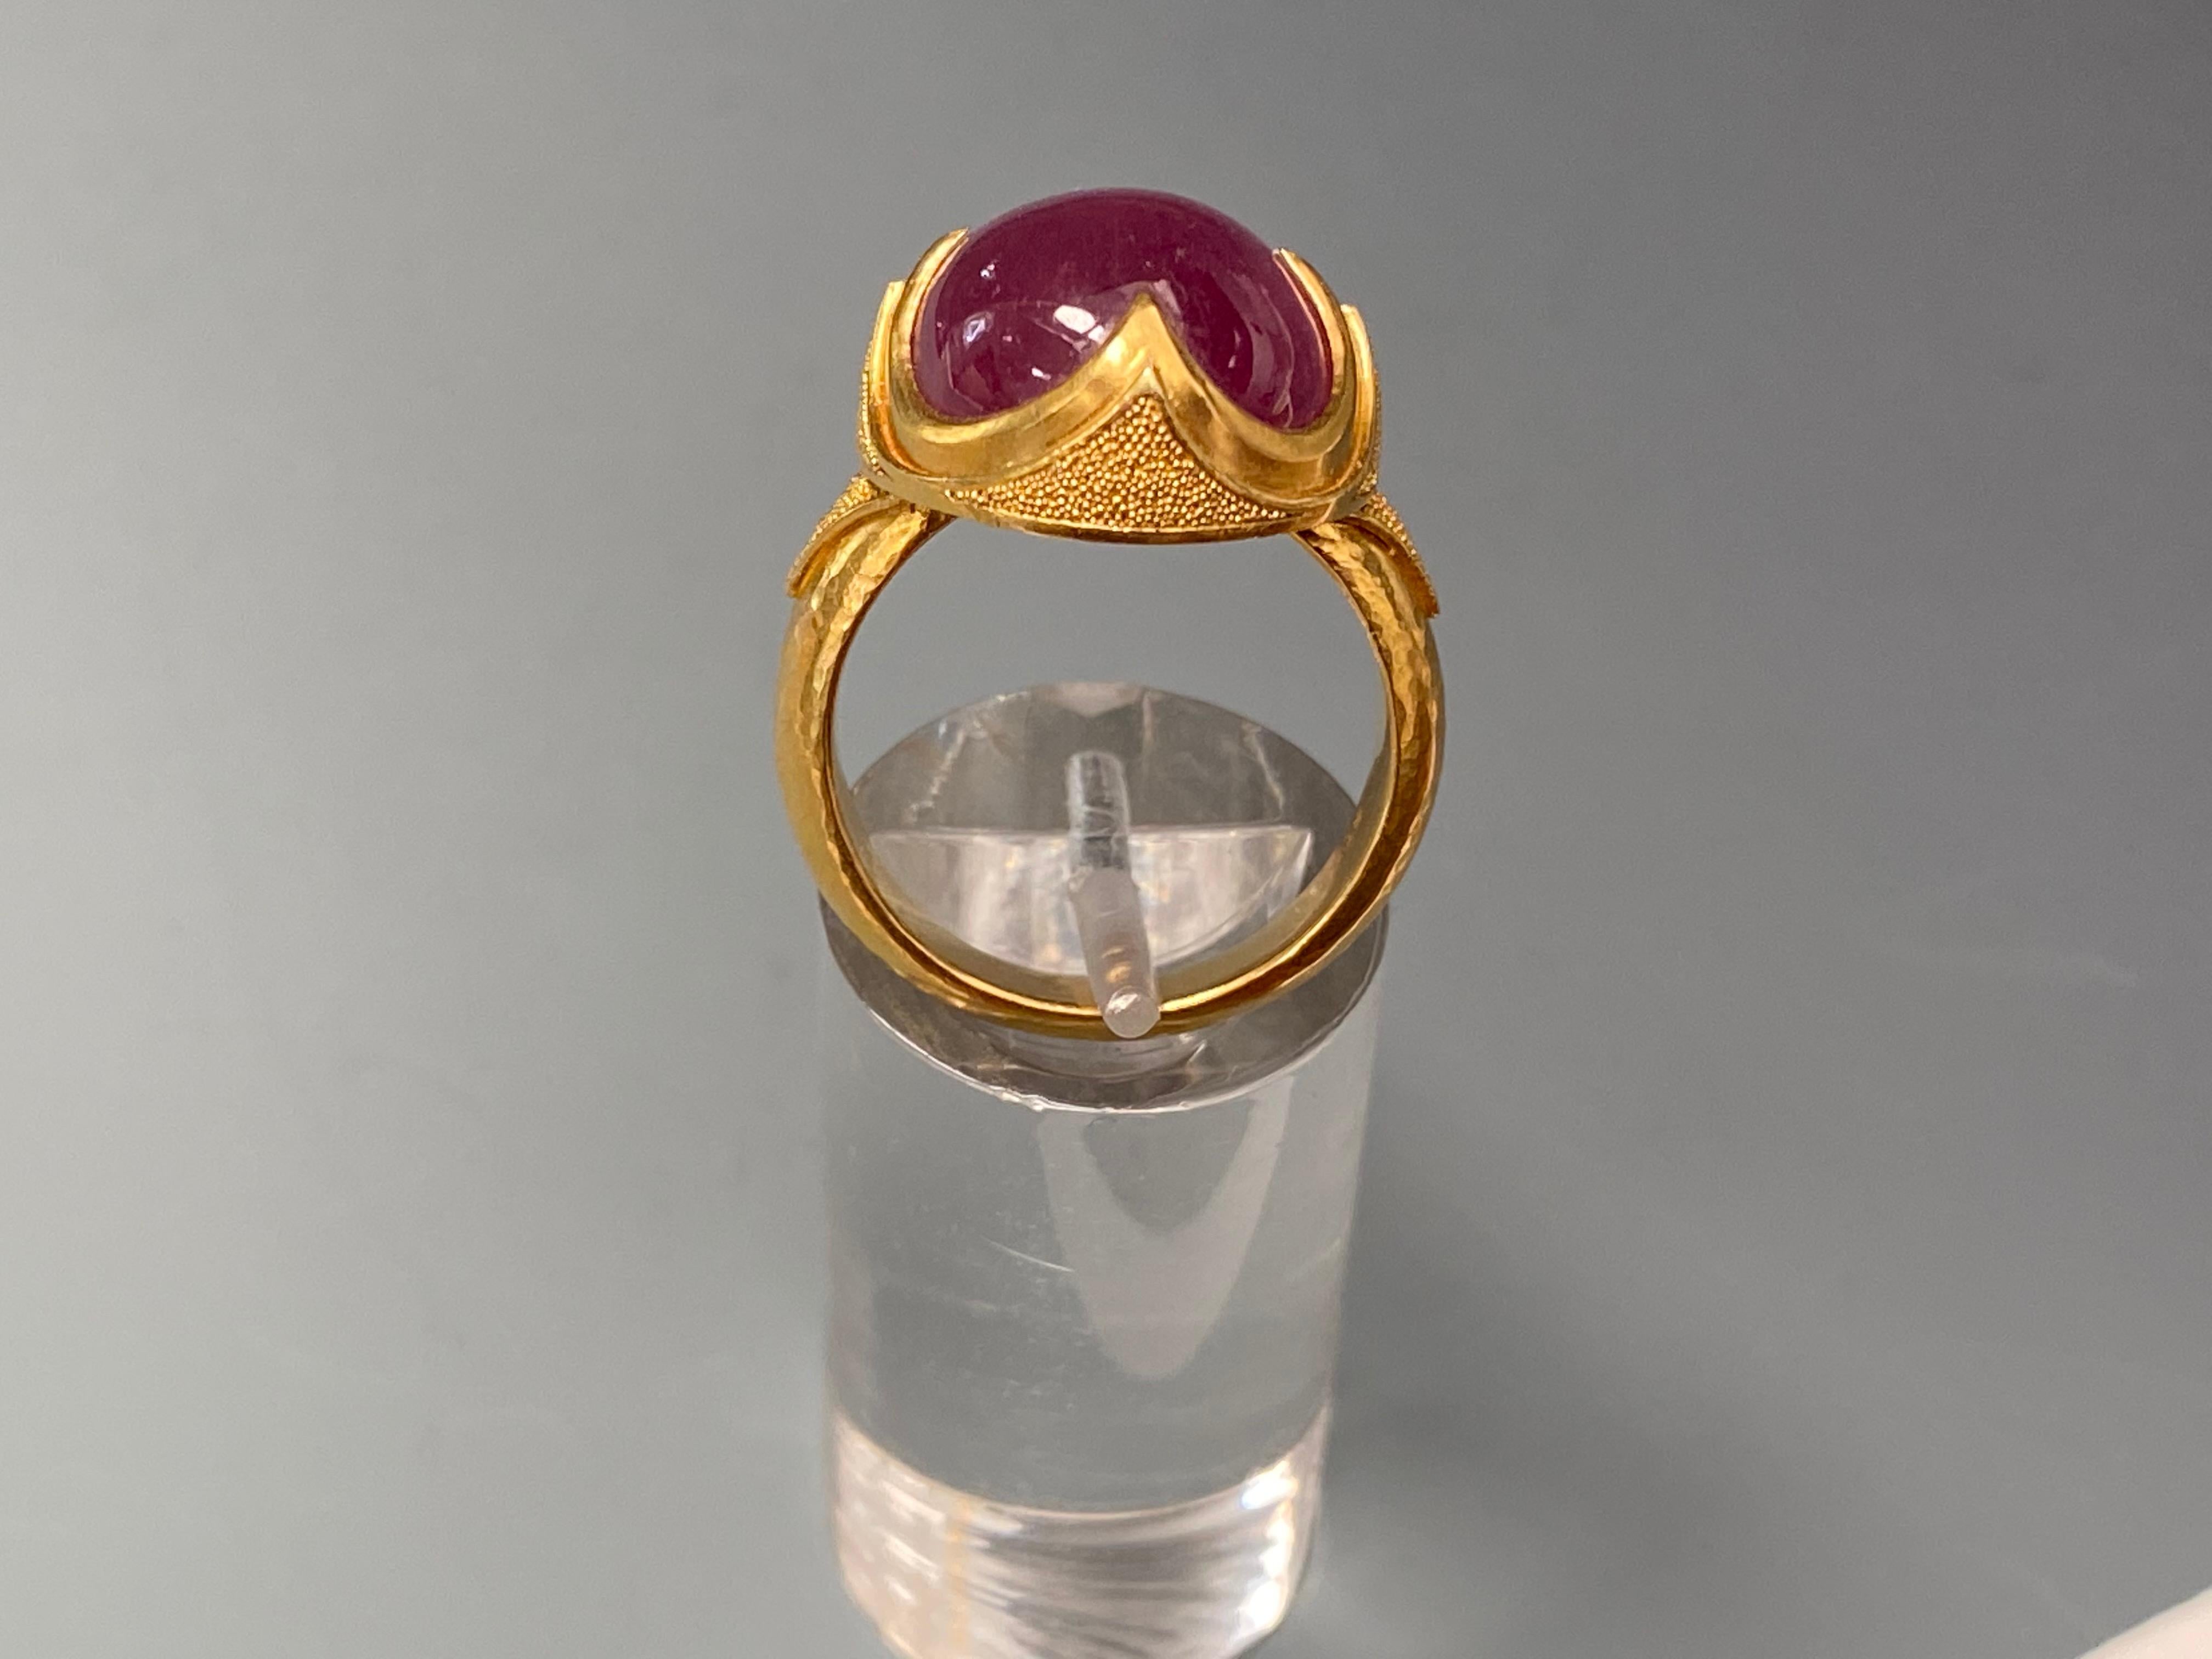 A gorgeous pink 22 Carat 12x16 mm cabochon Ruby is held in a 4 point classic design with fine gold 